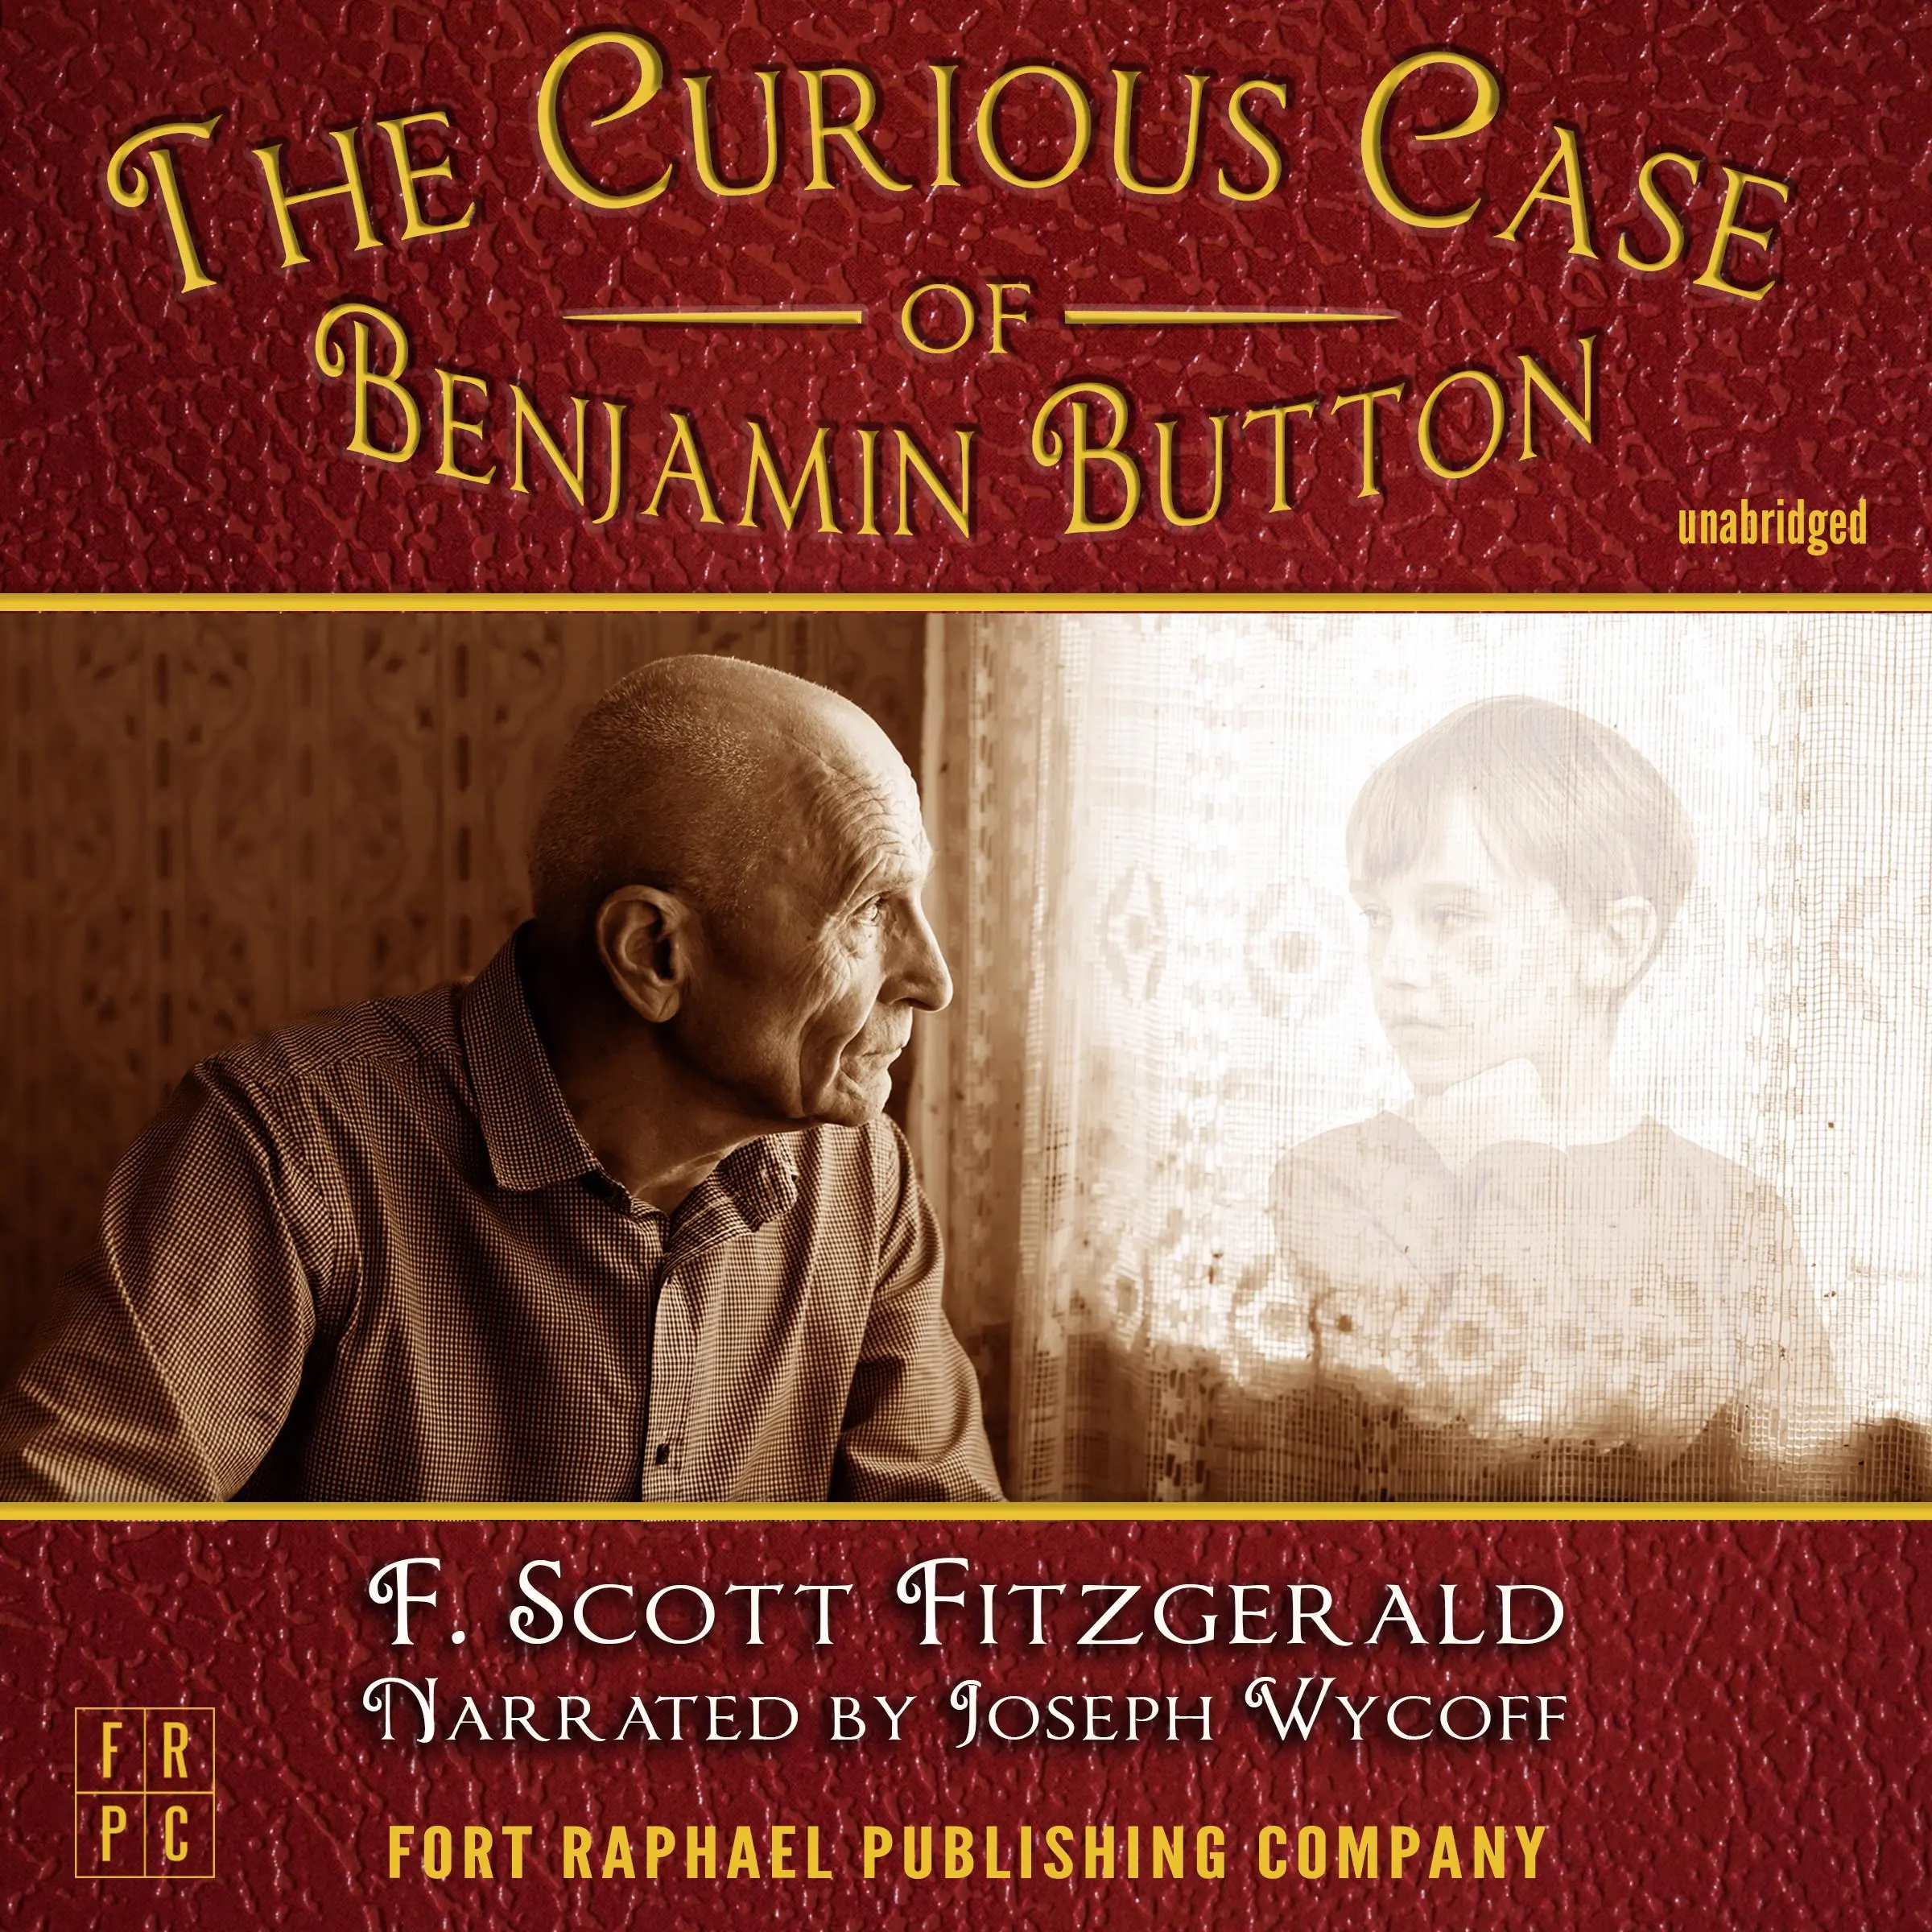 The Curious Case of Benjamin Button - Unabridged by F. Scott Fitzgerald Audiobook